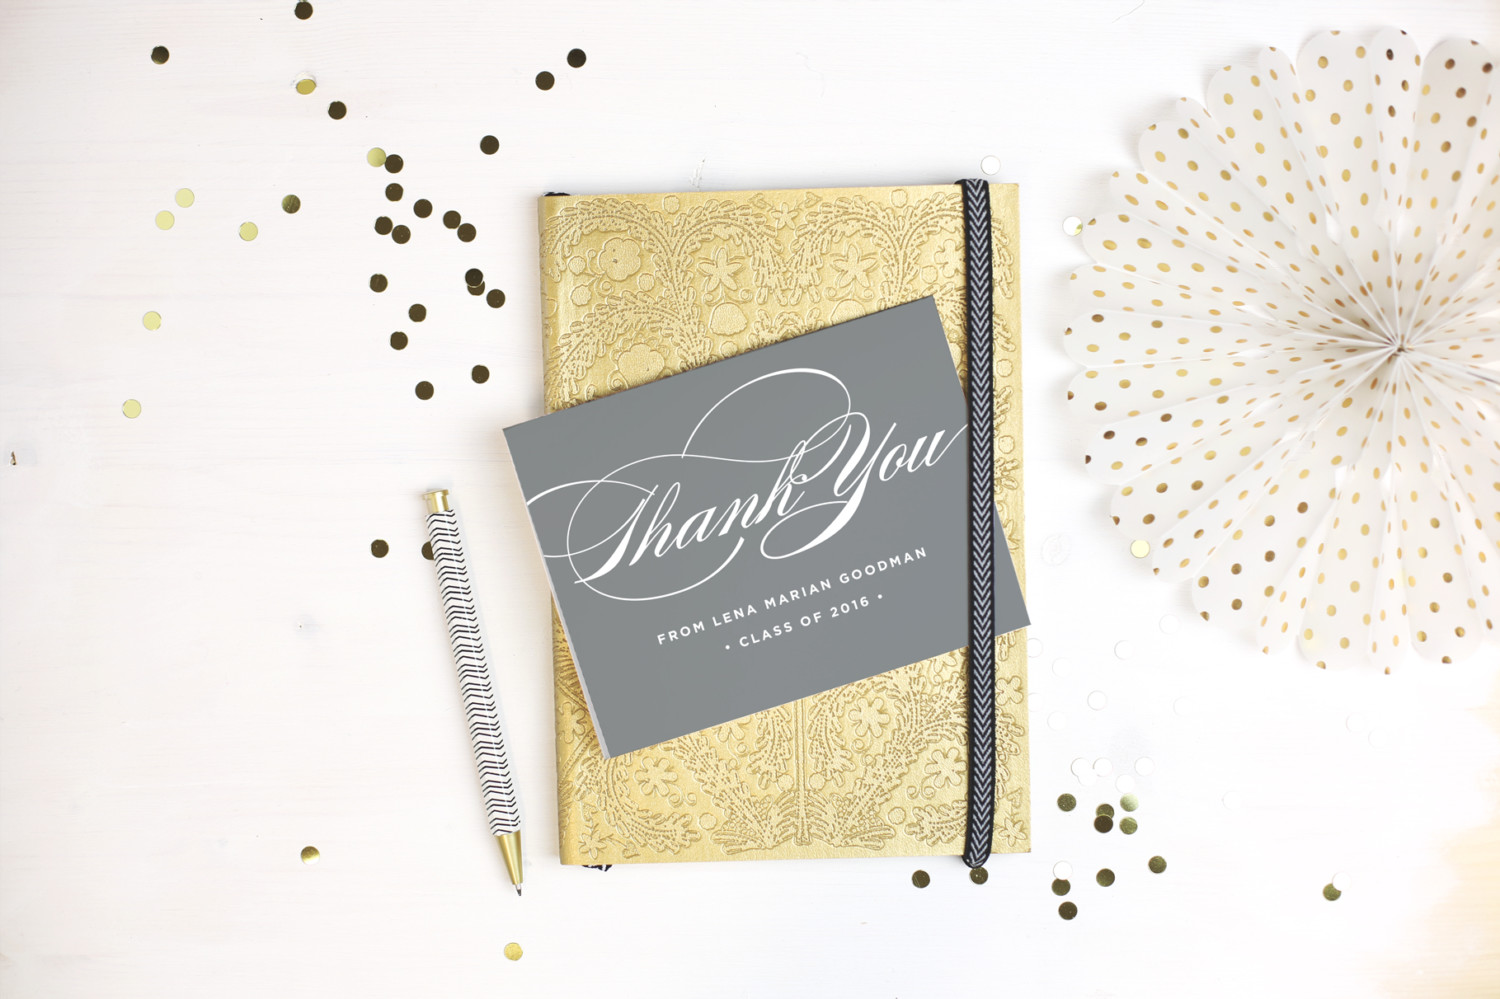 How To Write A Thank You Card Beautifully